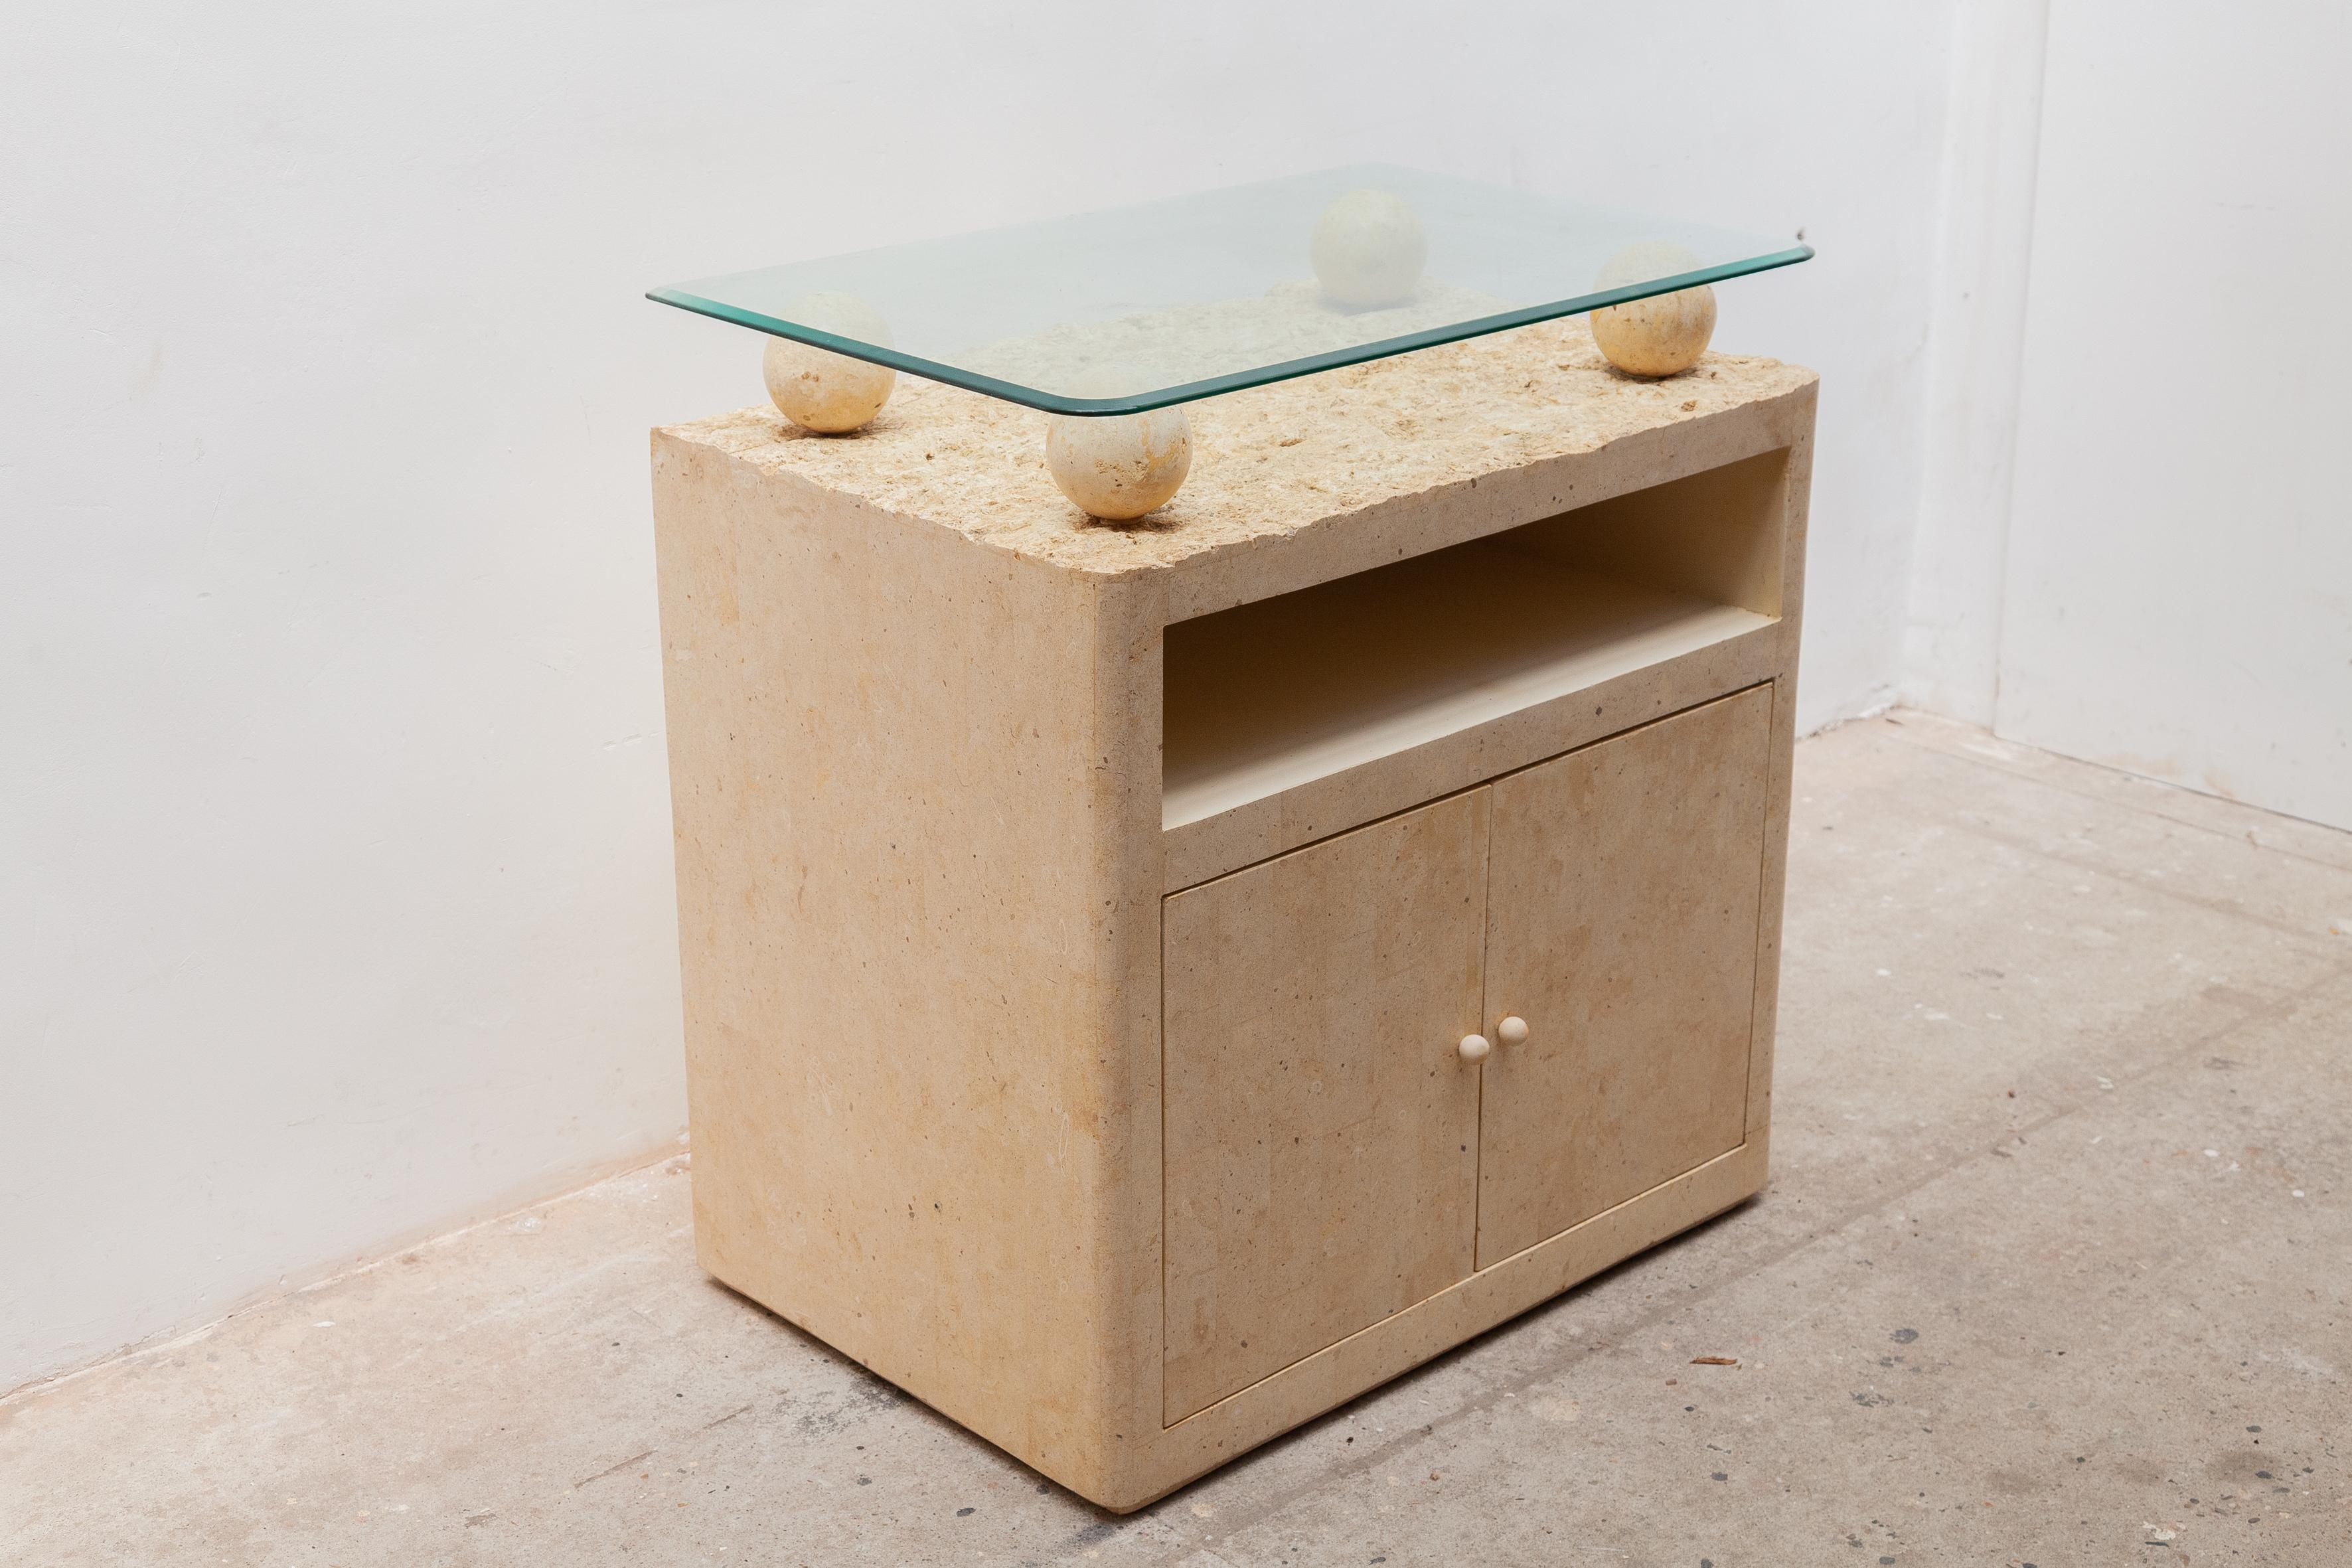 Minimalist design bar furniture by the Italian manufacture made in the '80s. The furniture is in a beautiful used vintage condition. A faux marble dry bar/cabinet with a faceted glass top for your wine bottles and glasses. This piece of furniture is